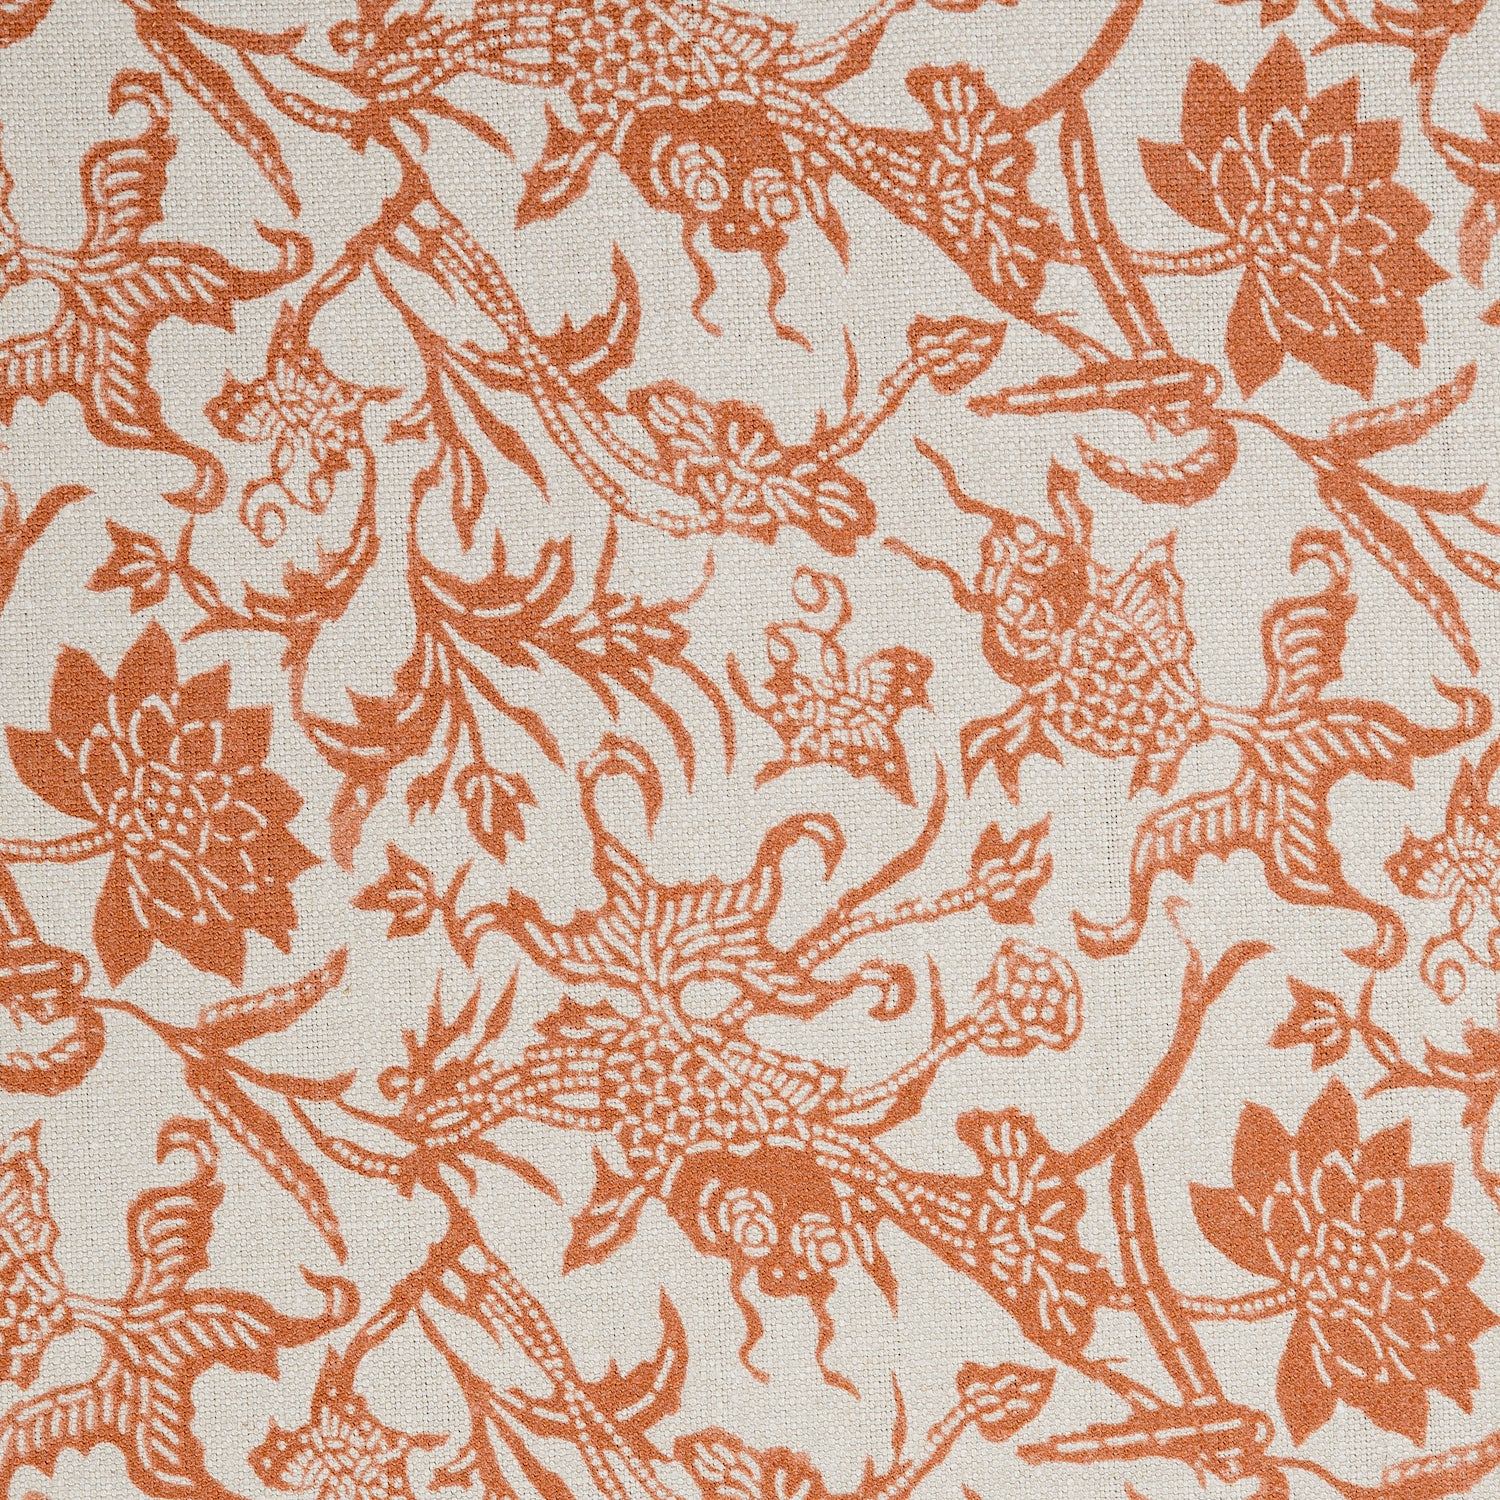 Detail of a linen fabric in a carp and leaf pattern in orange on a beige field.